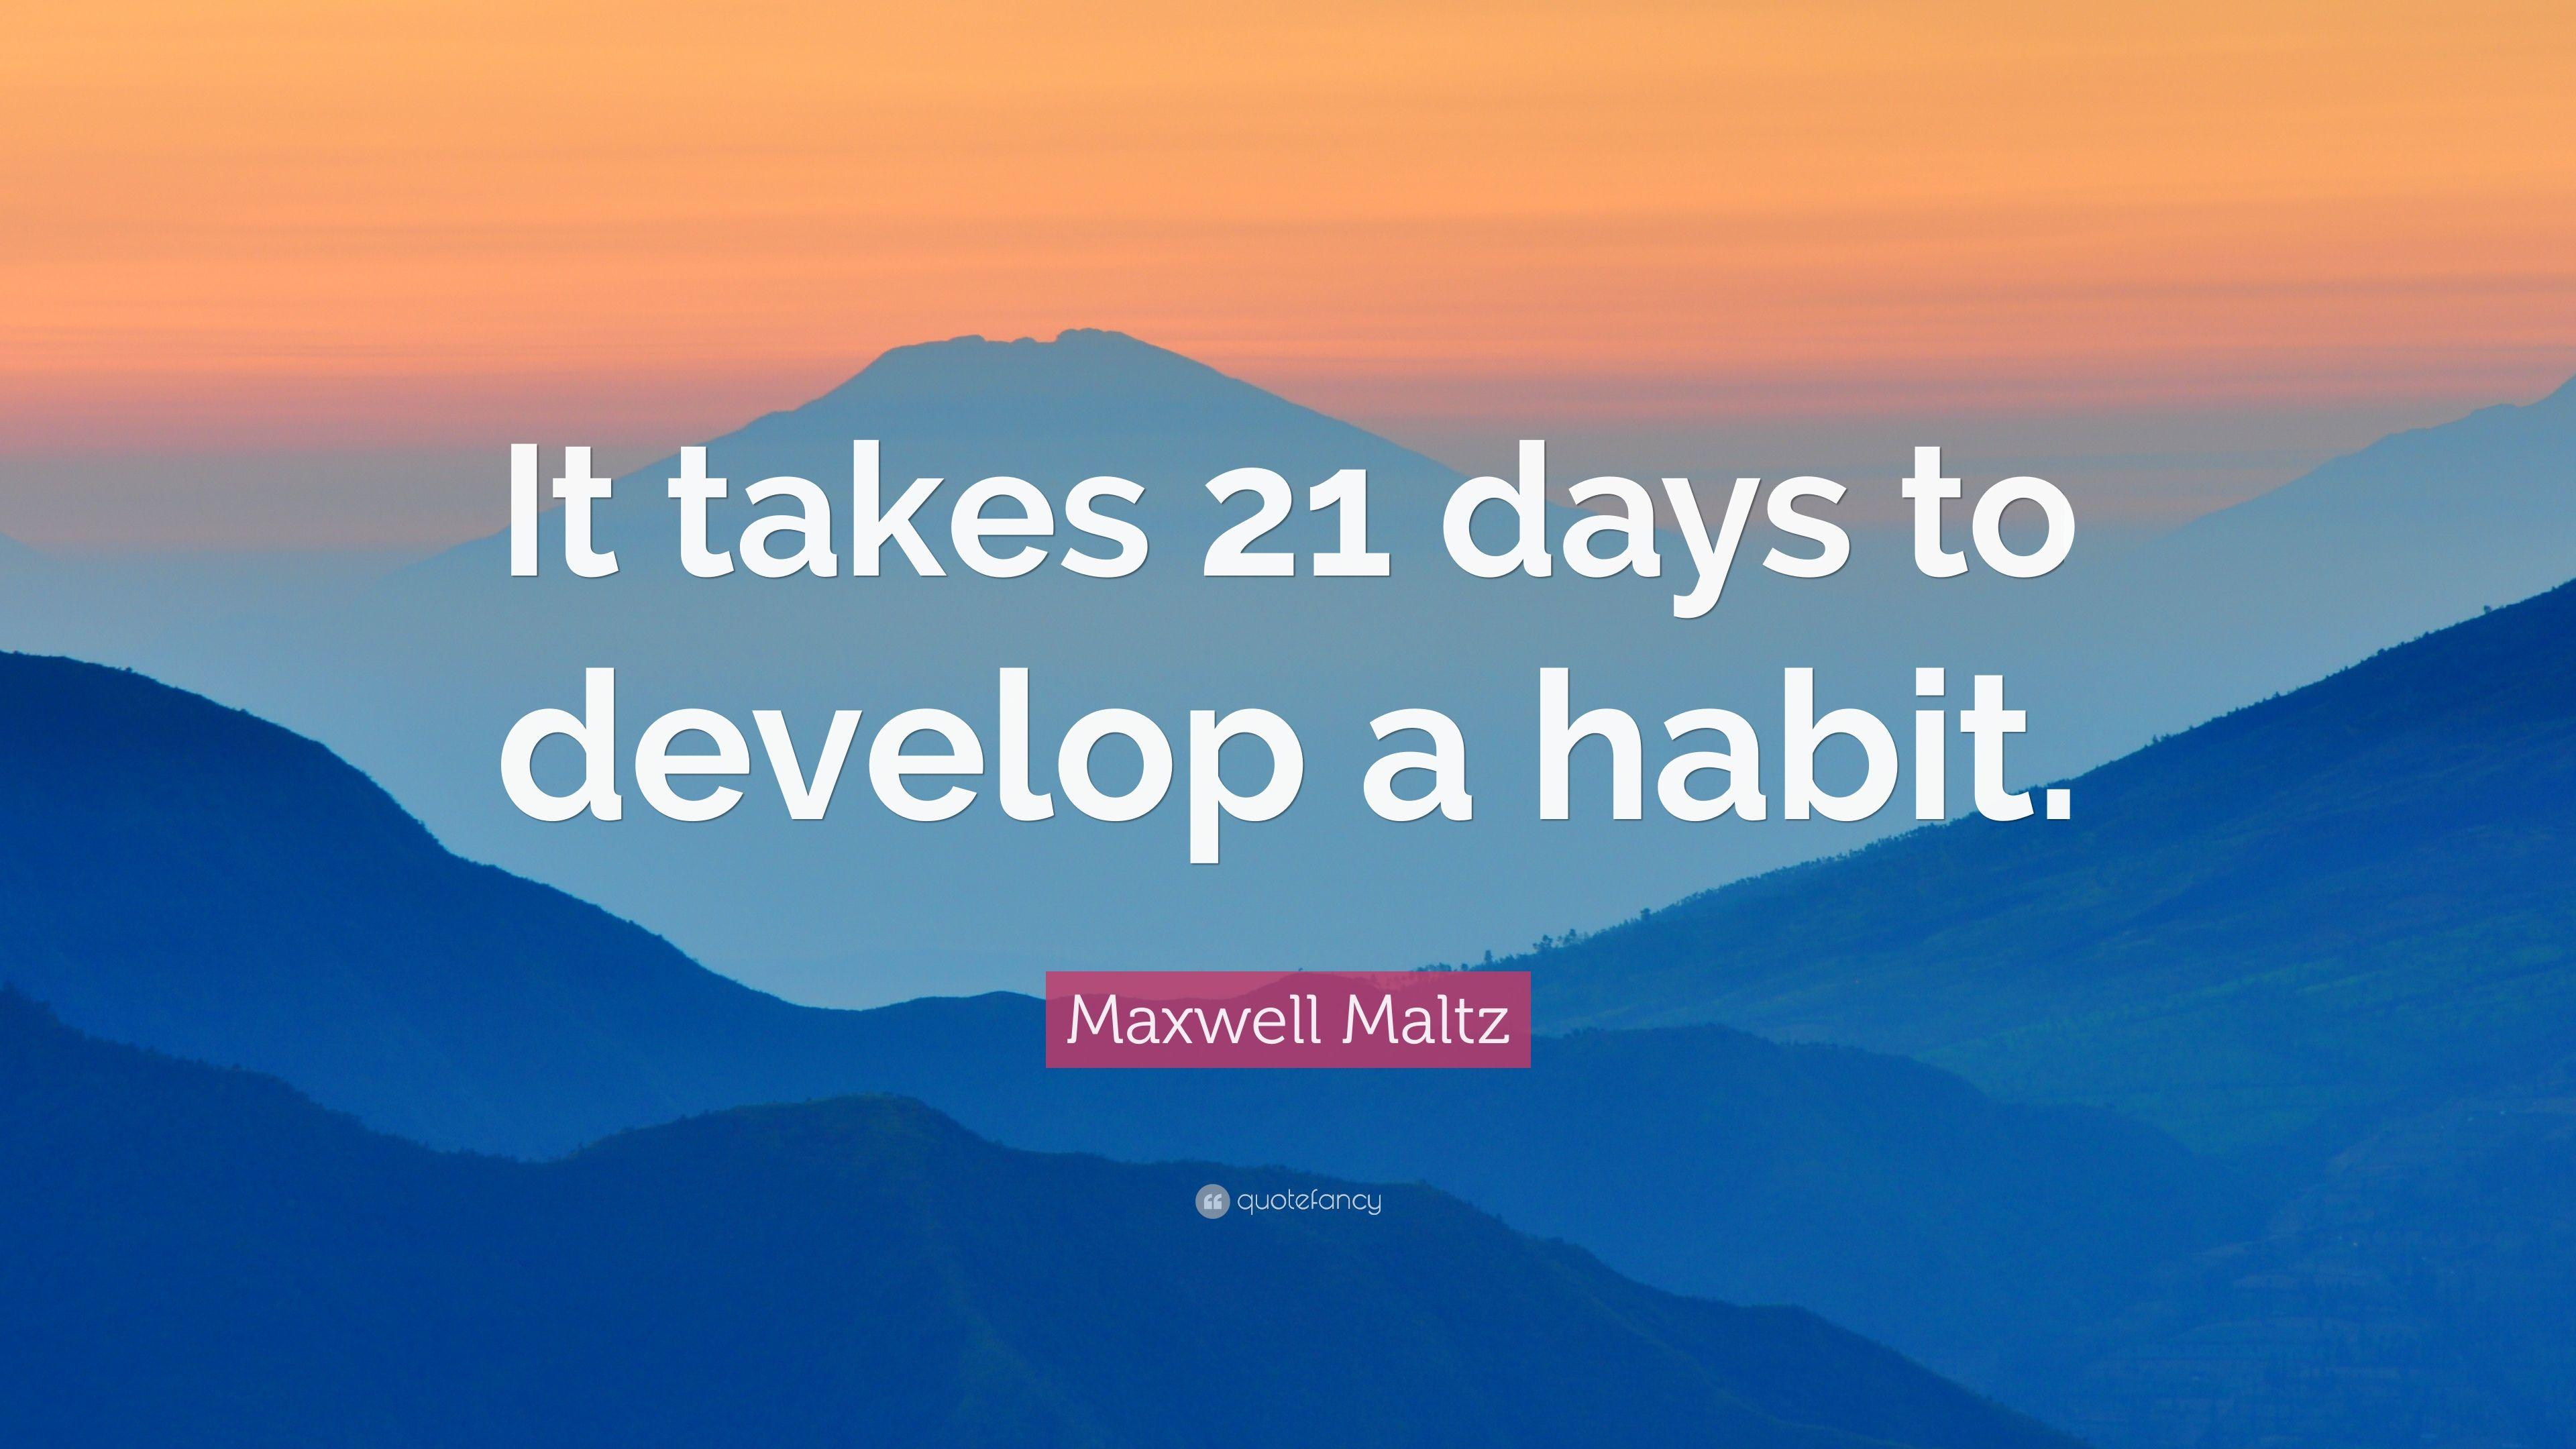 Maxwell Maltz Quote: “It takes 21 days to develop a habit.” 9